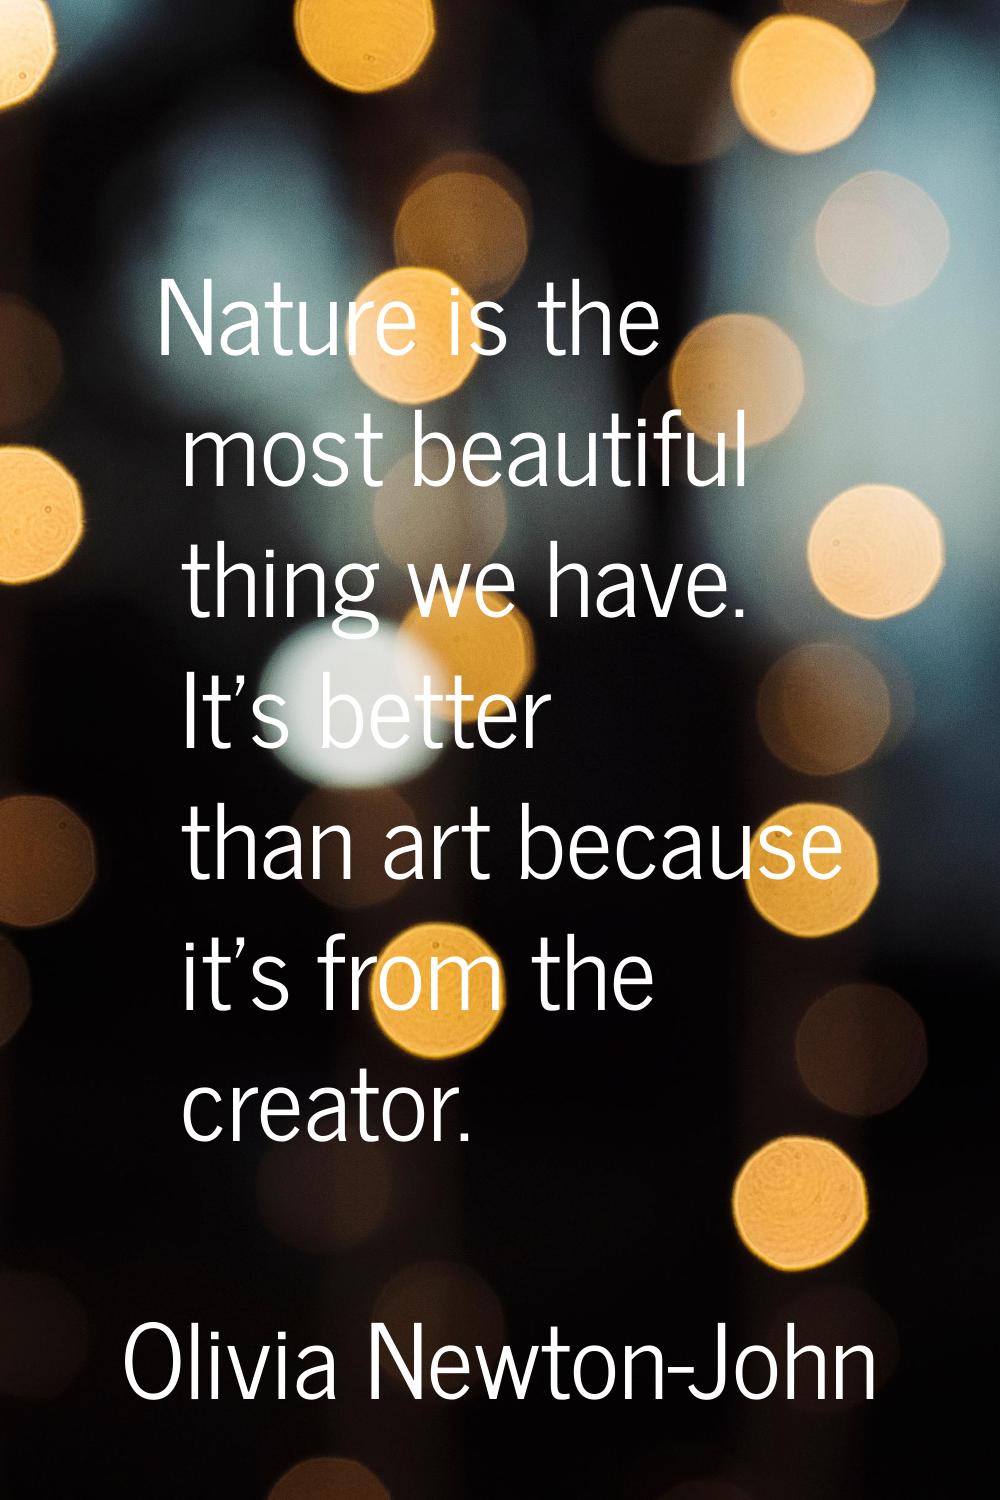 Nature is the most beautiful thing we have. It's better than art because it's from the creator.